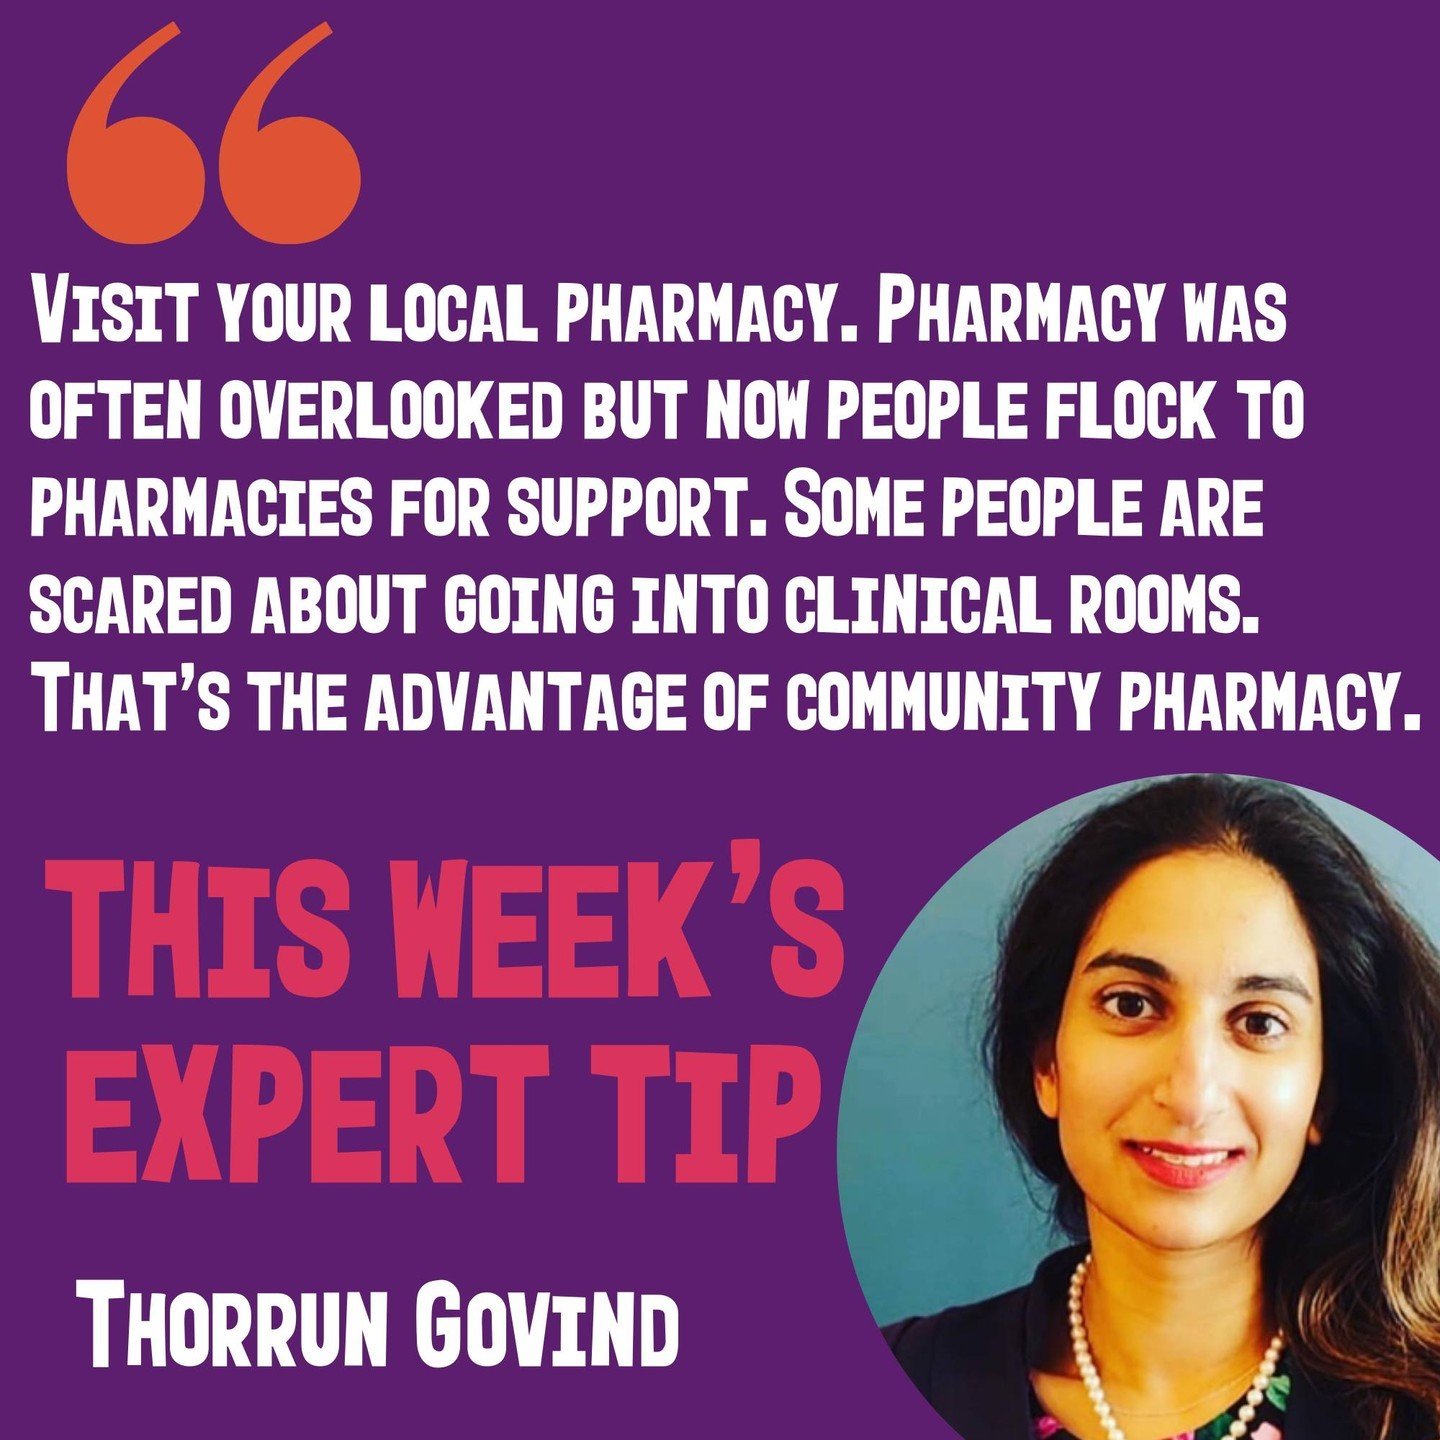 &ldquo;We work so hard to gain that trust, as a healthcare professional it&rsquo;s really important.&rdquo;

Thorrun Govind is a TV pharmacist and healthcare lawyer.

Thank you for that great advice, and reminding us there is support available in our